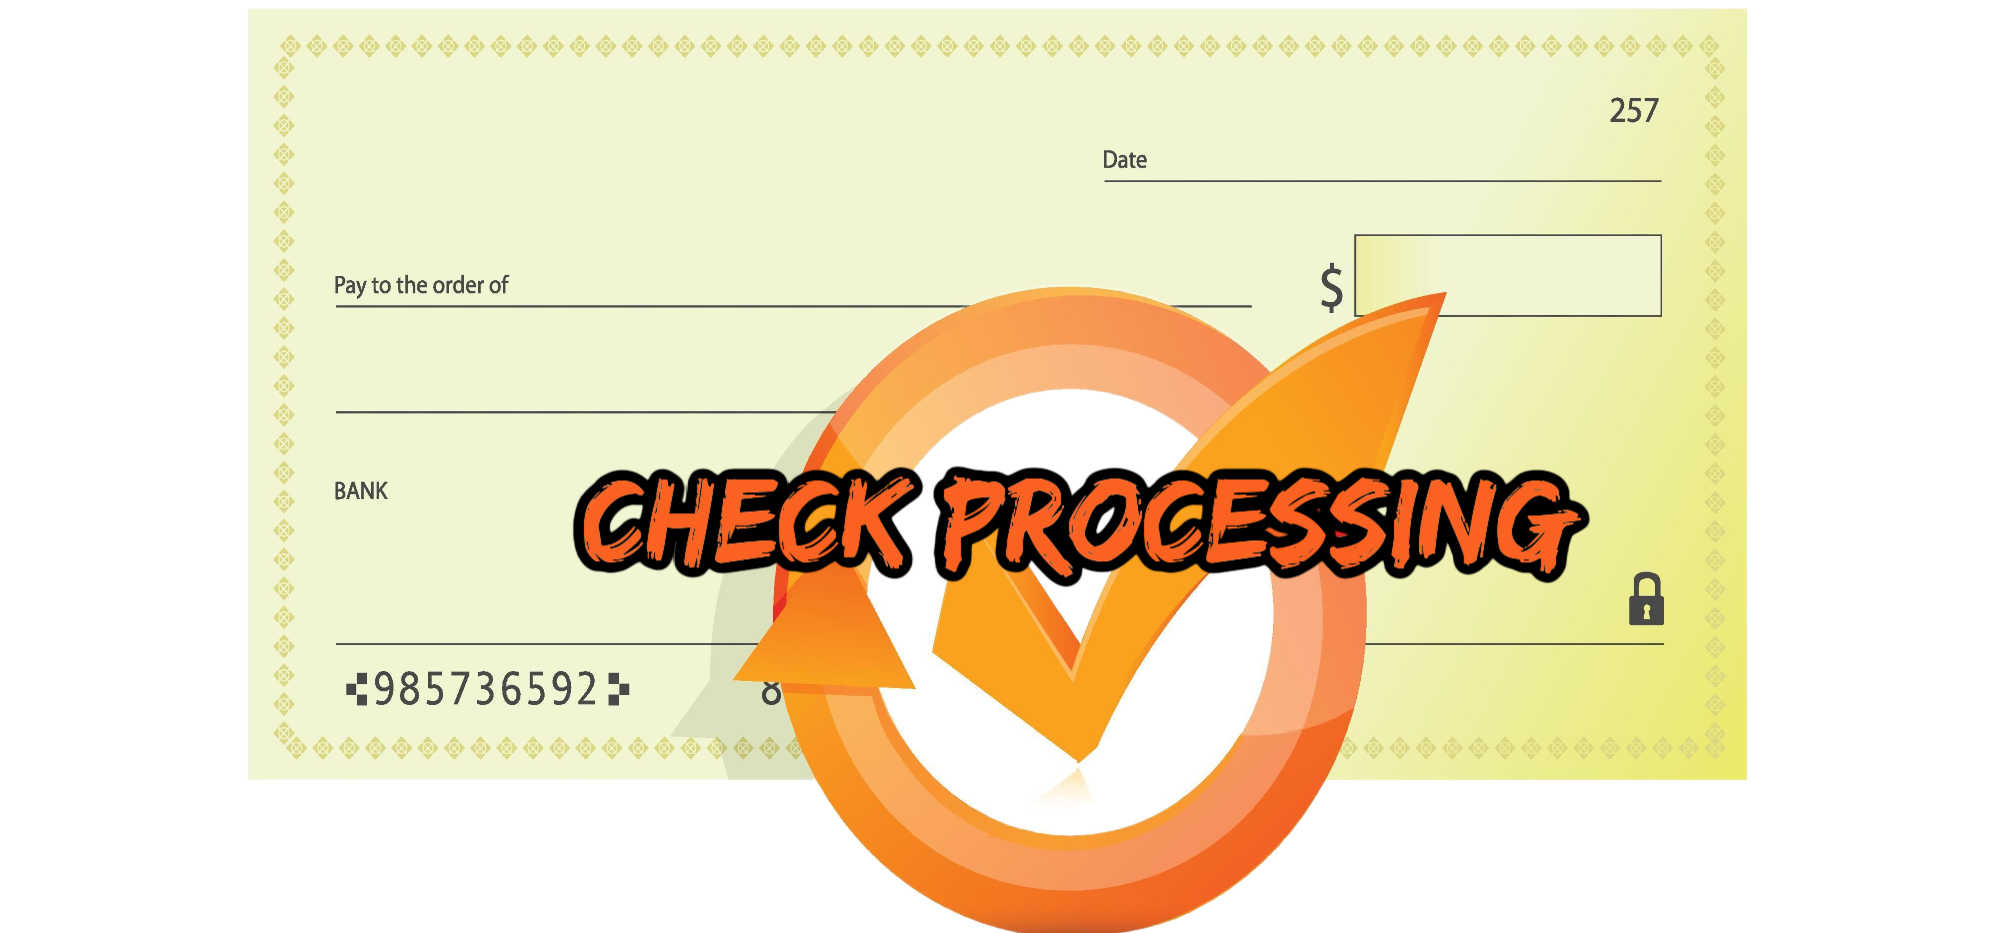 image of payment processing alliance check processing